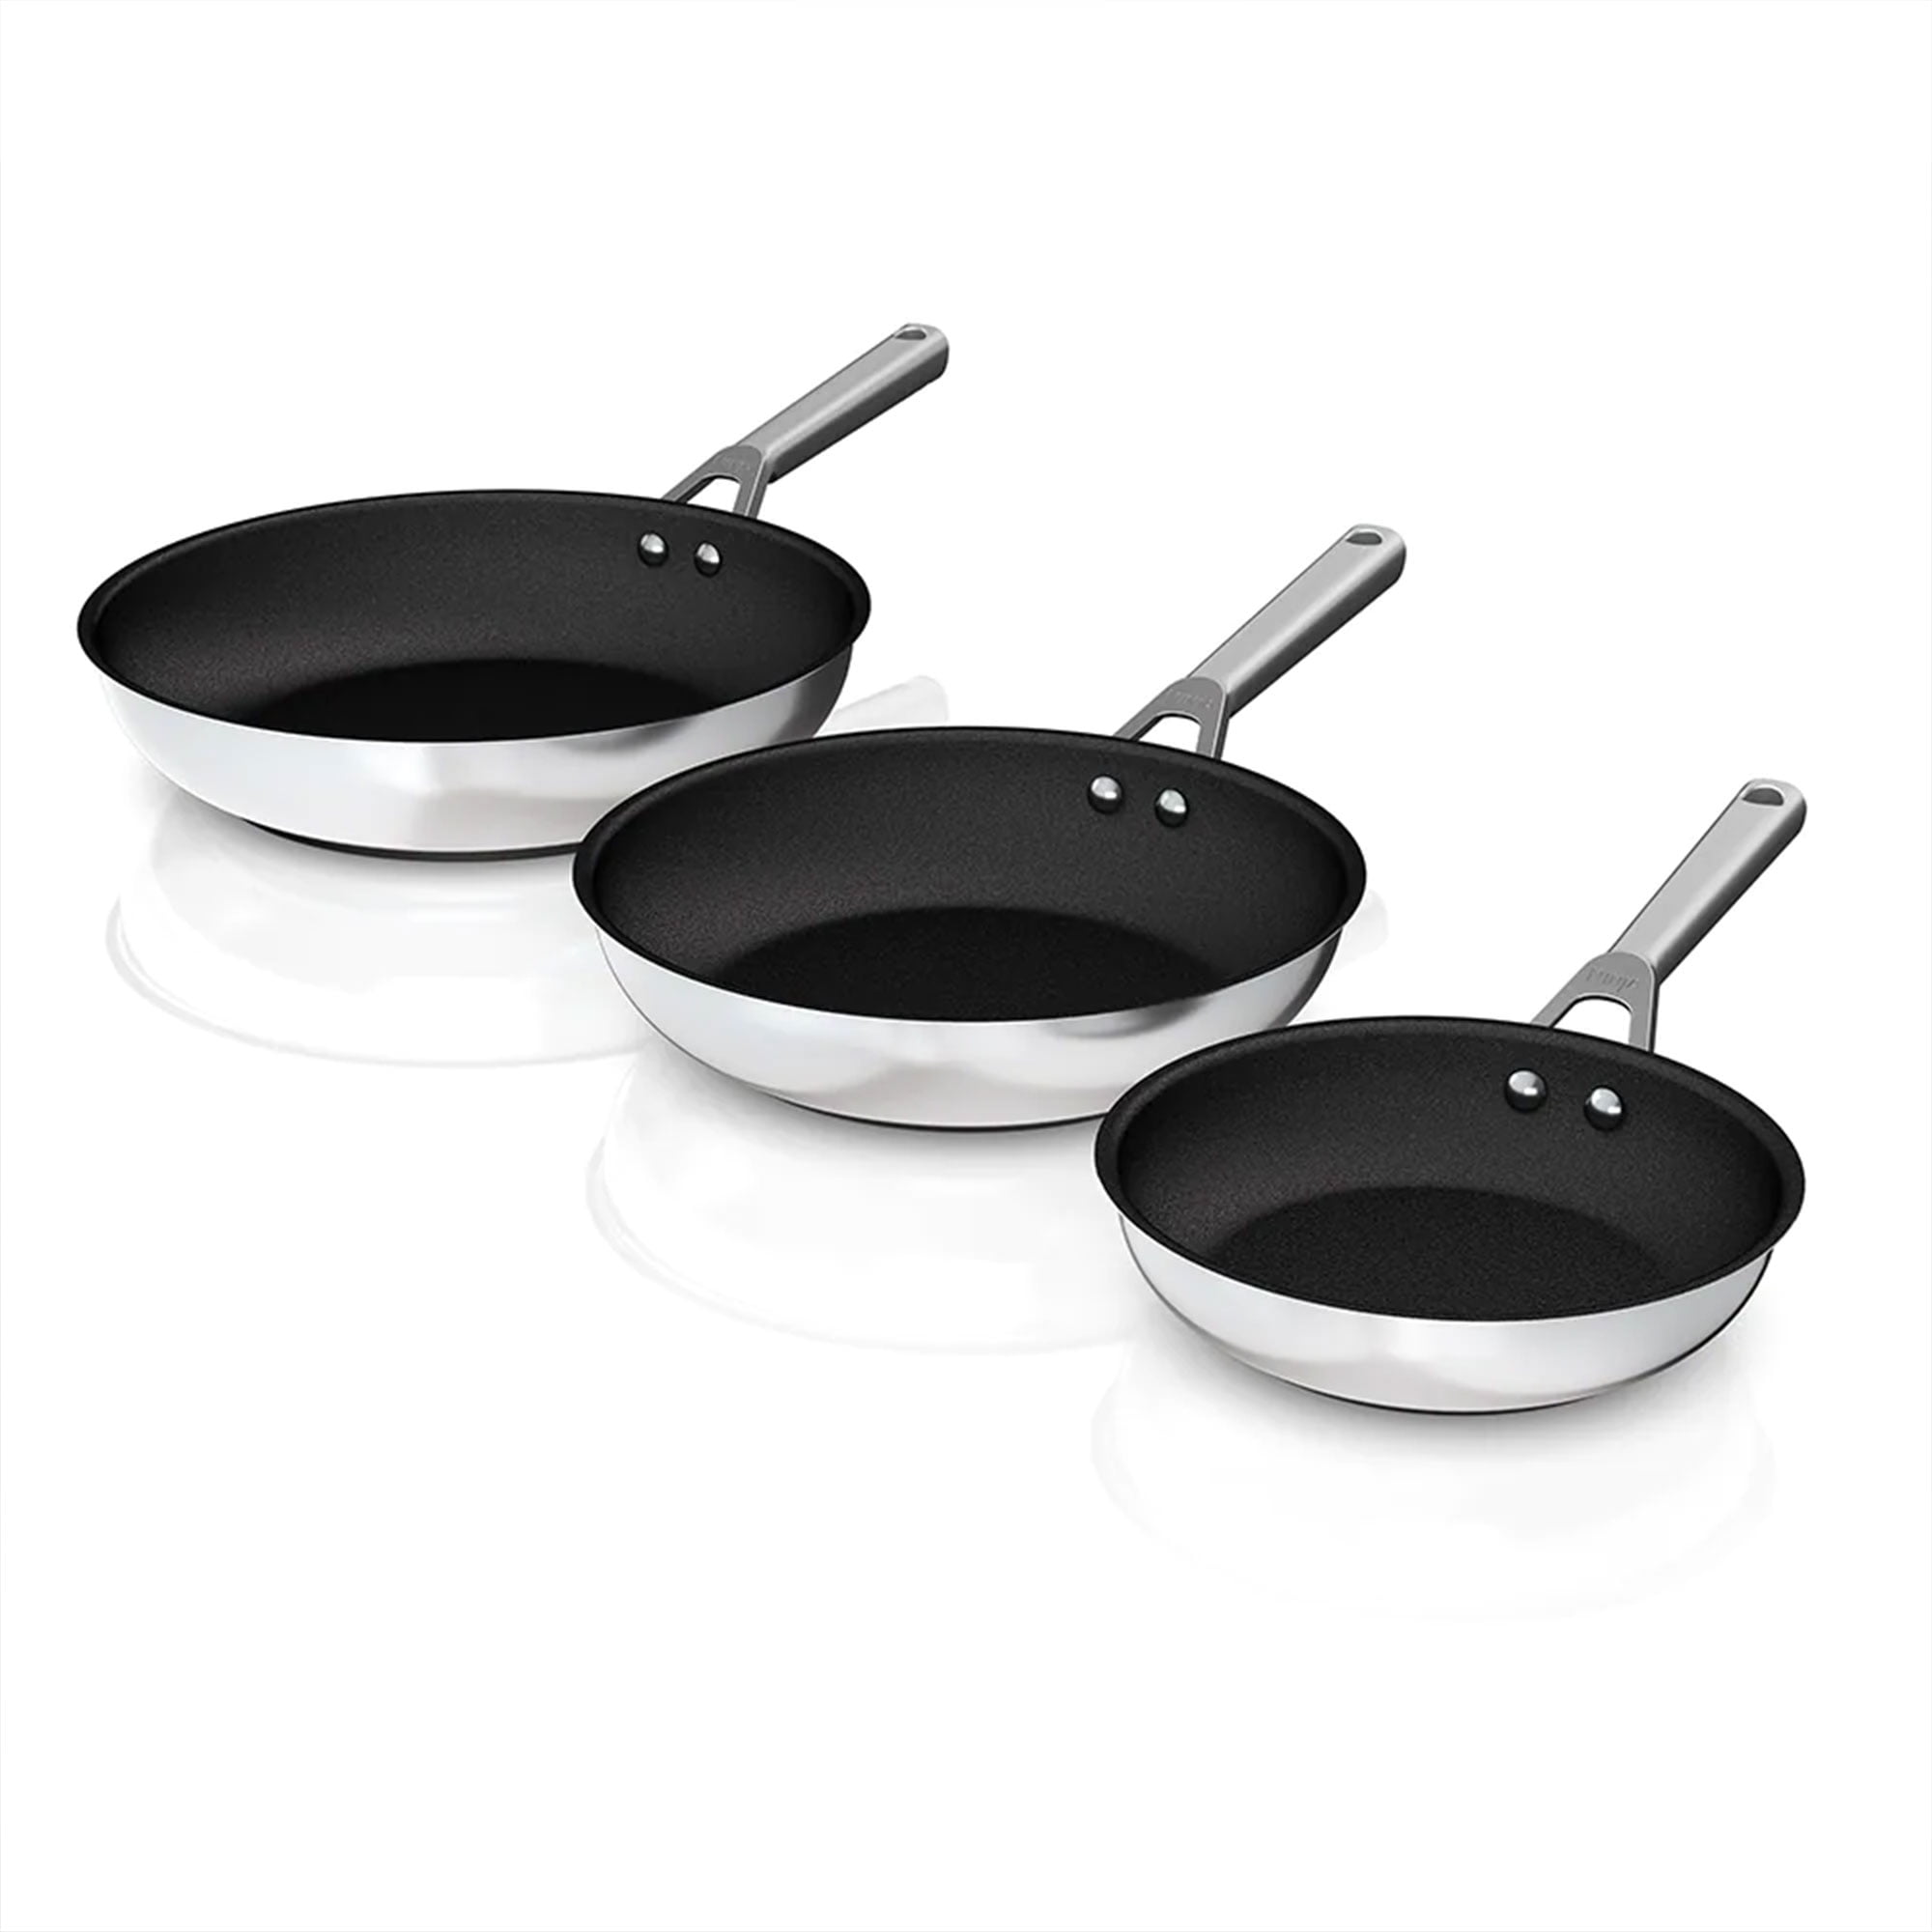 Ninja Foodi oven-safe pots and pans cookware sets now up to $100 off at   from $140